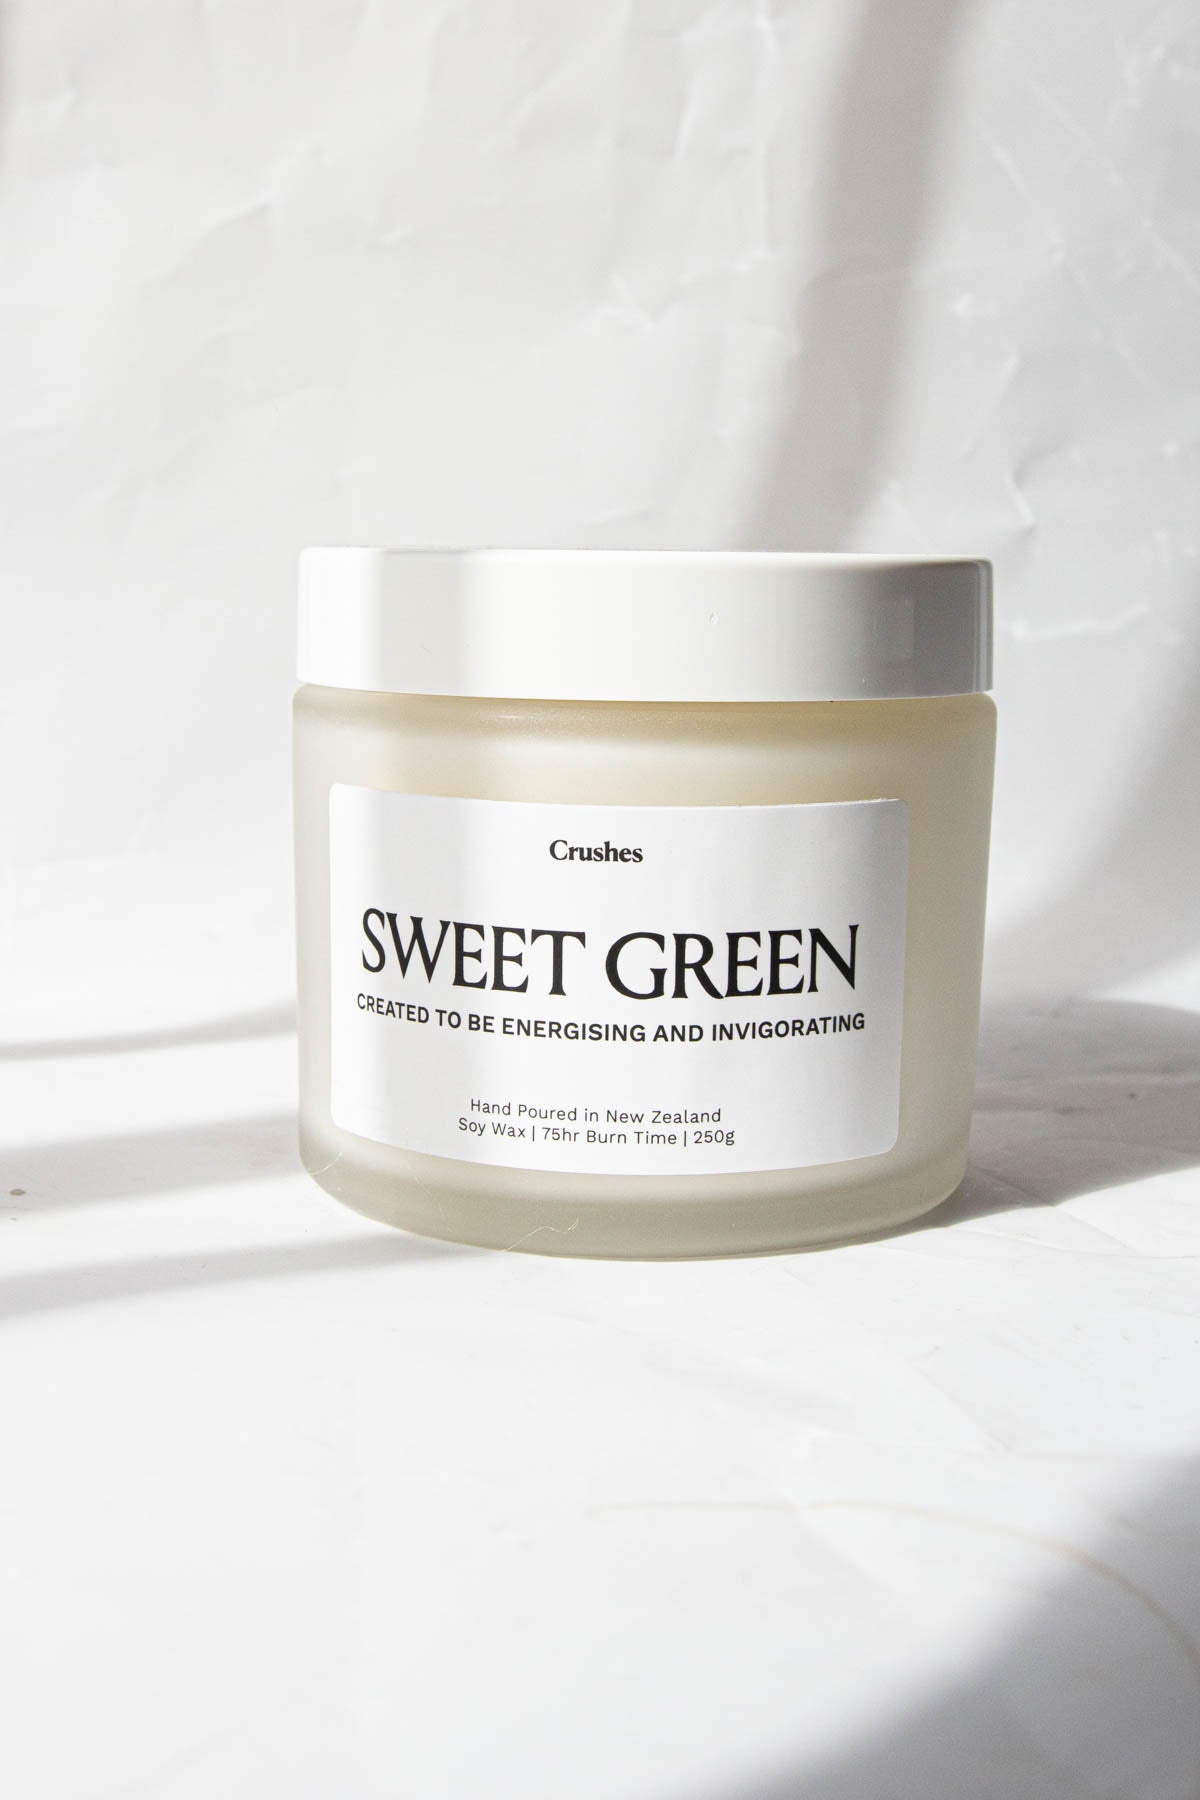 Sweet Green - Refreshing Candle